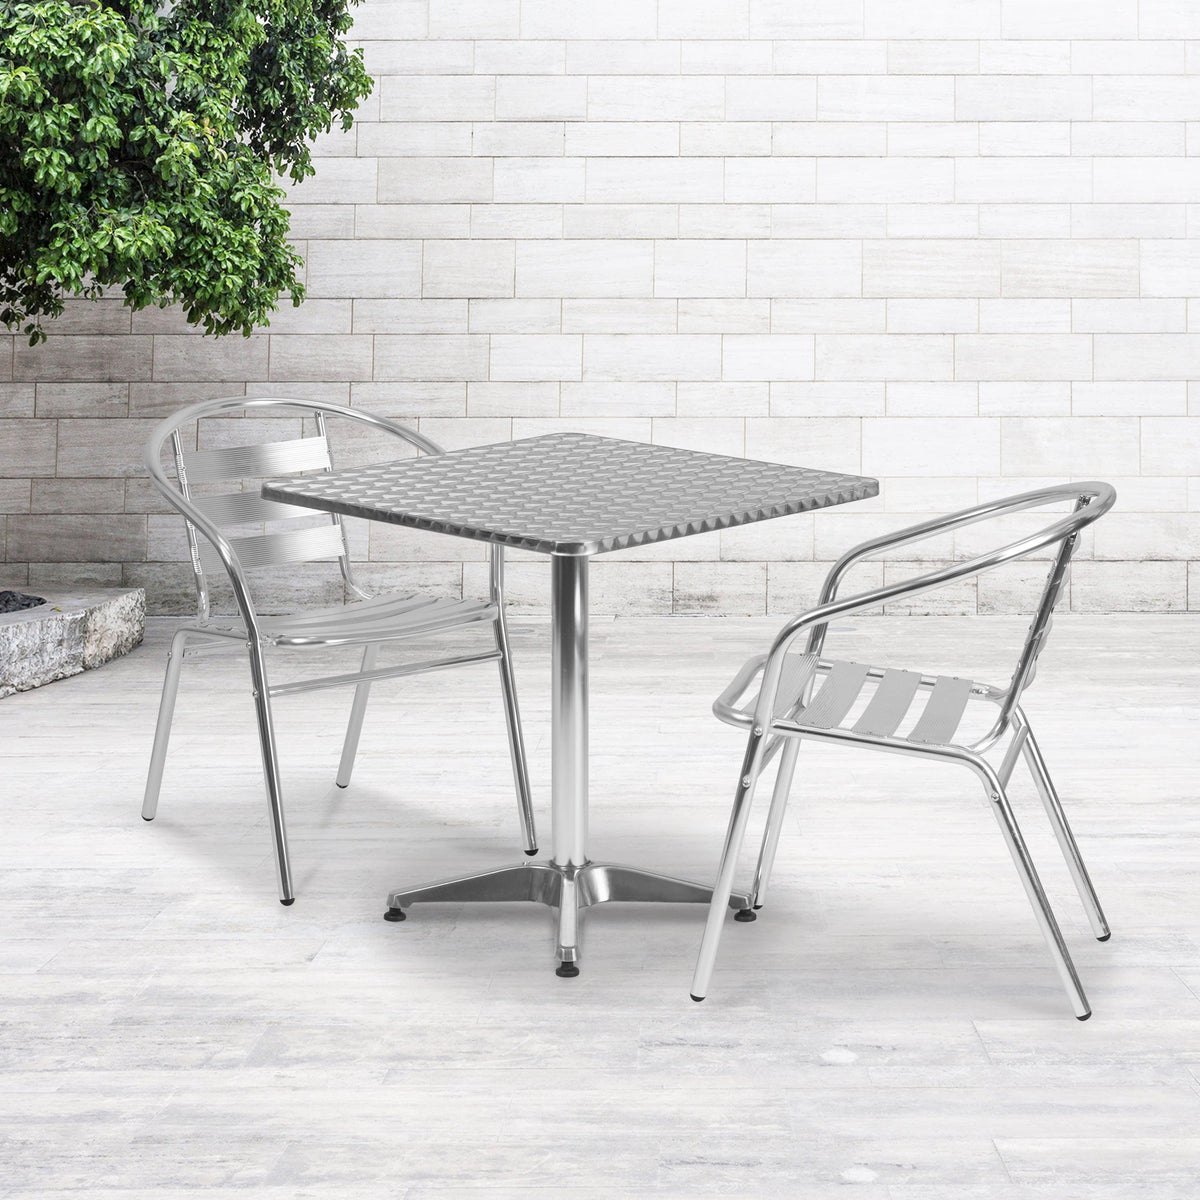 Aluminum |#| 27.5inch Square Aluminum Indoor-Outdoor Table Set with 2 Slat Back Chairs